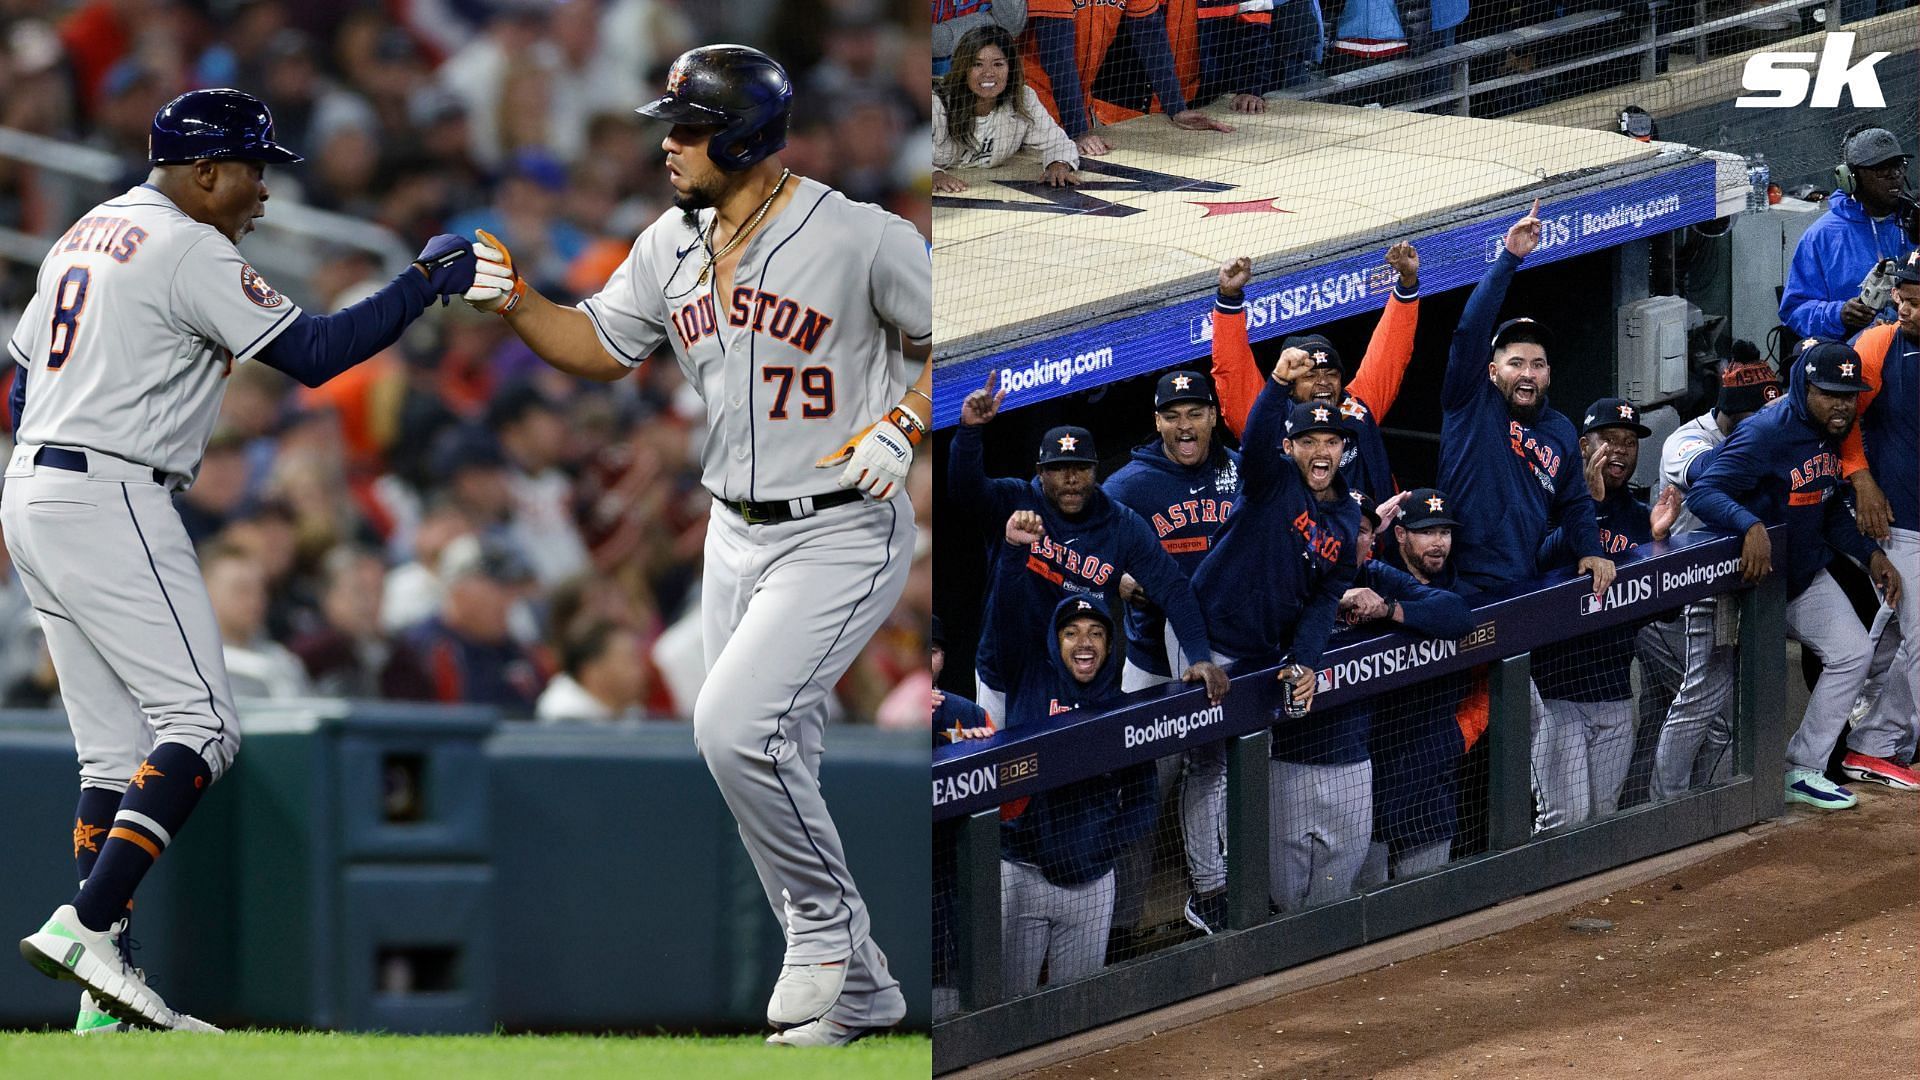 The Houston Astros will play the Rangers in Game 1 of the ALCS 